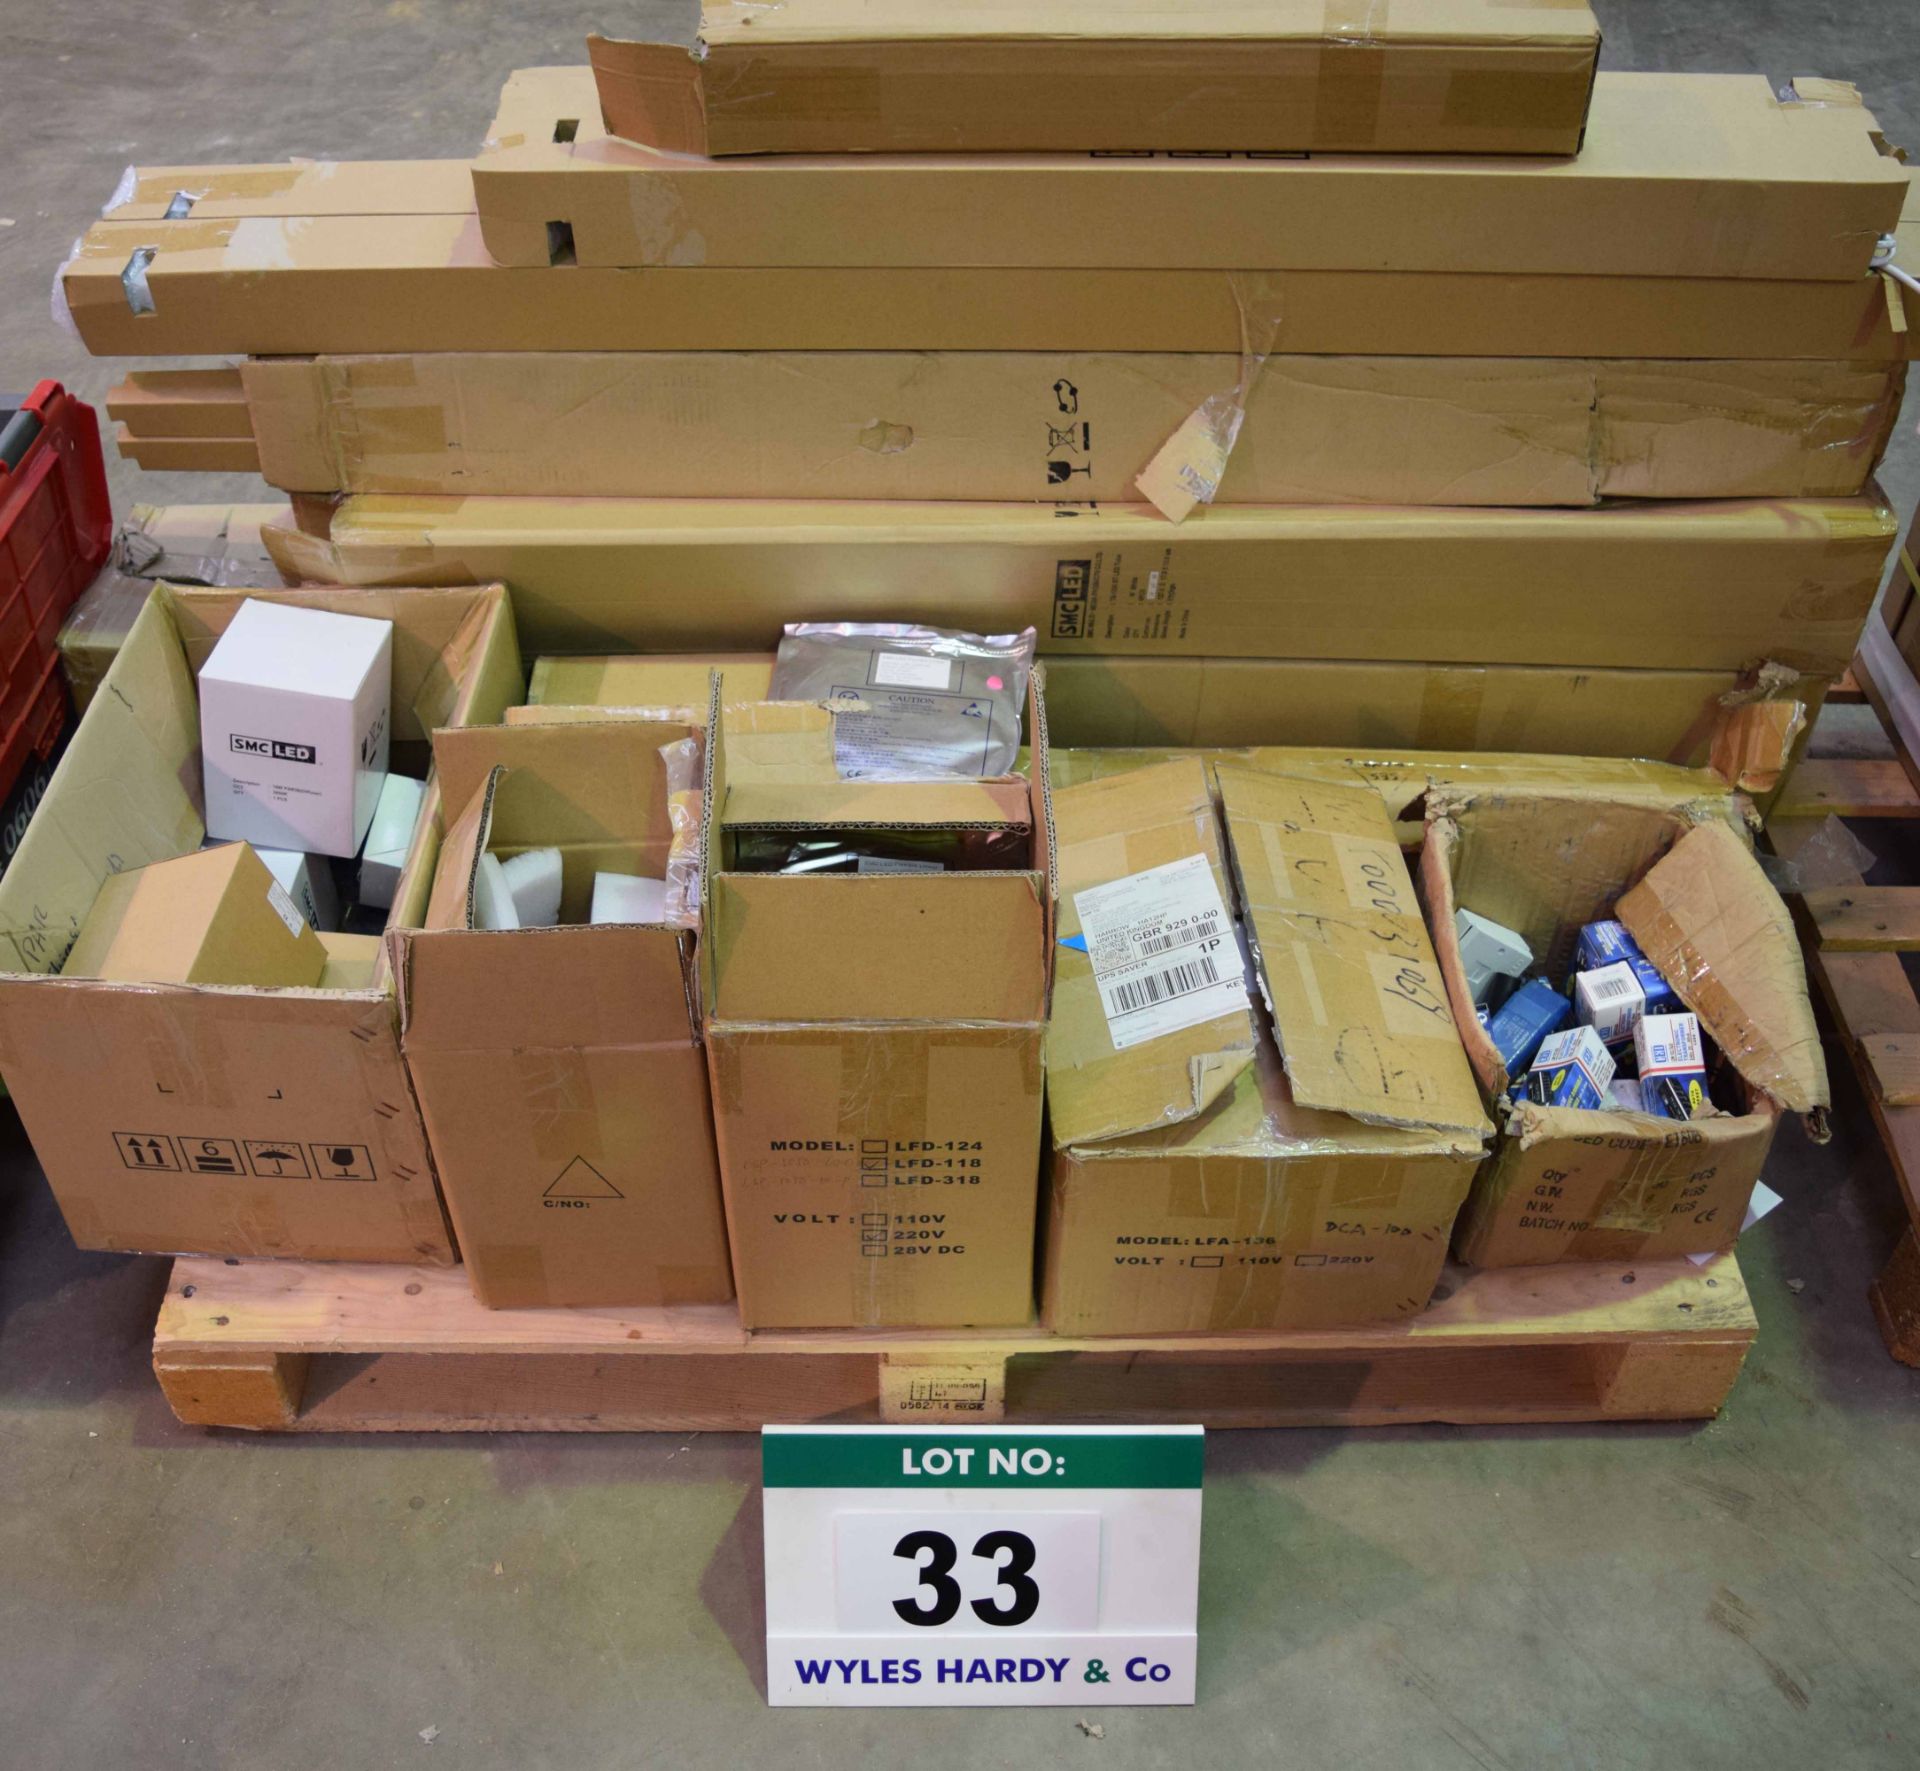 A Pallet of Industrial LED Lighting including Strip Lighting Lamps, Strip Light Fittings, LED